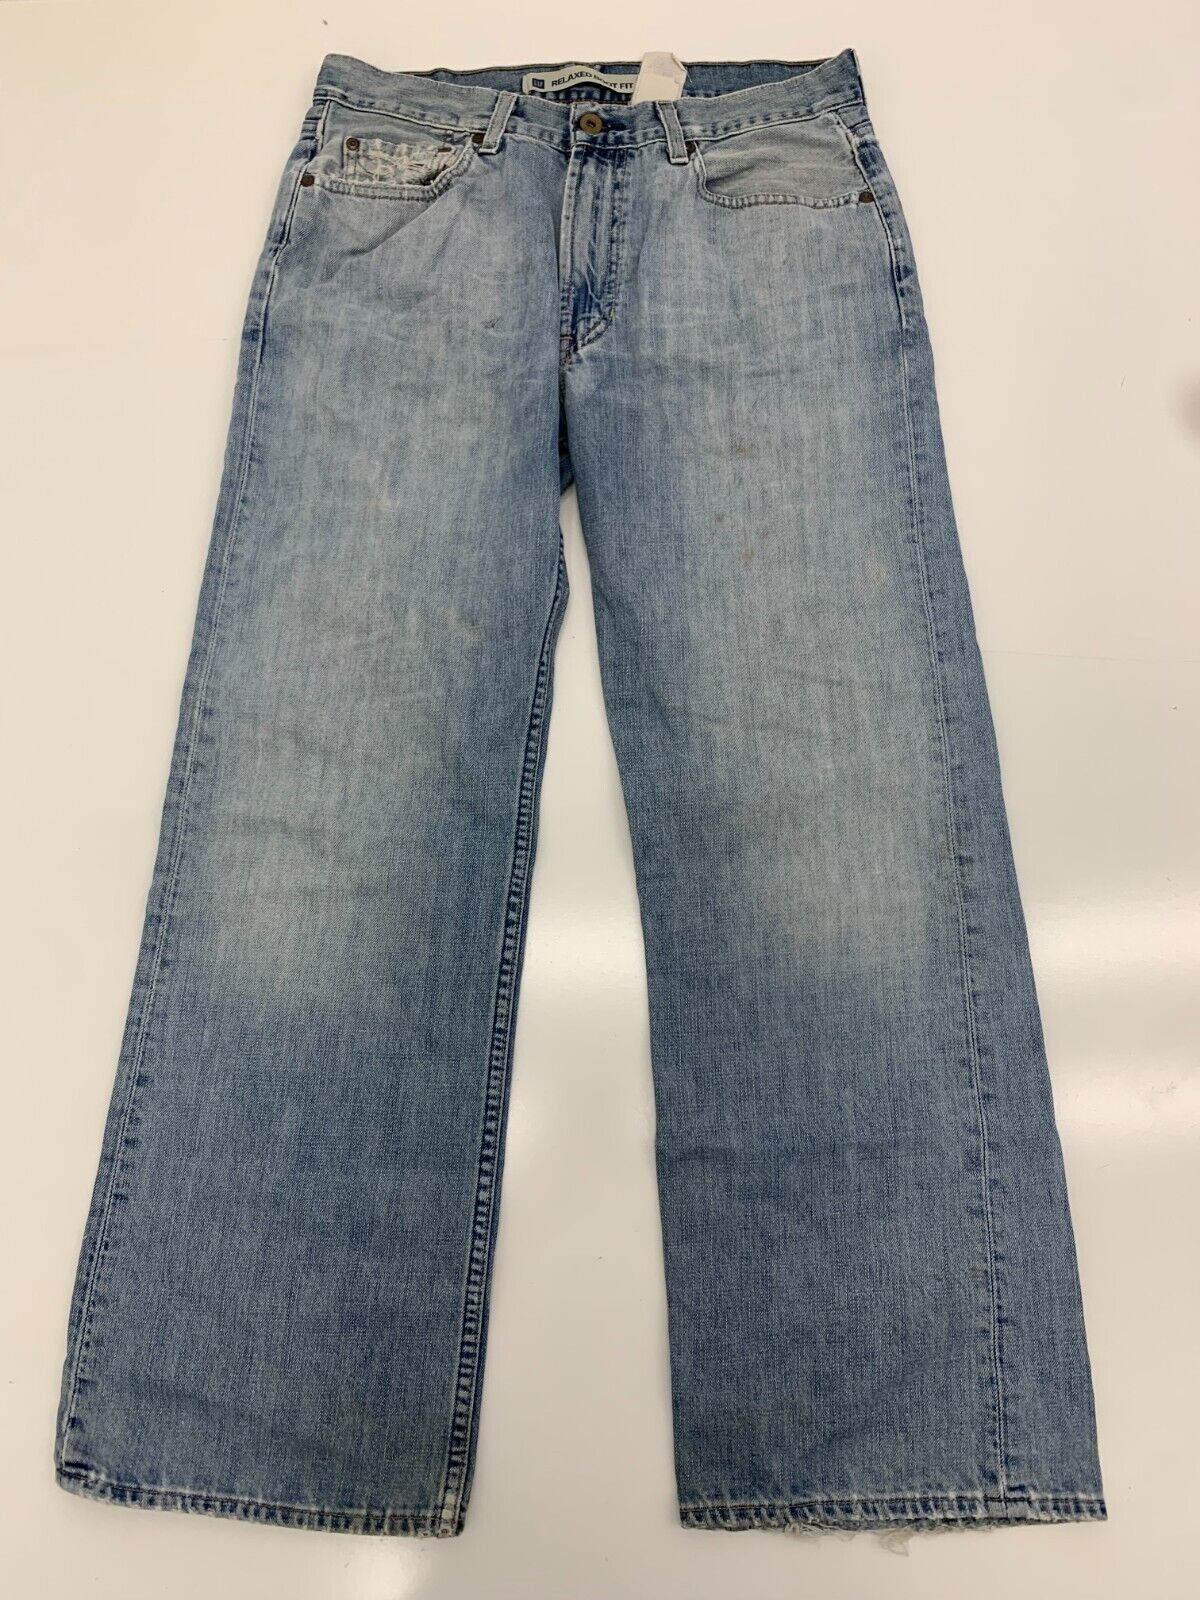 Gap Mens Relaxed Boot Fit Blue Denim Jeans Size 32x30